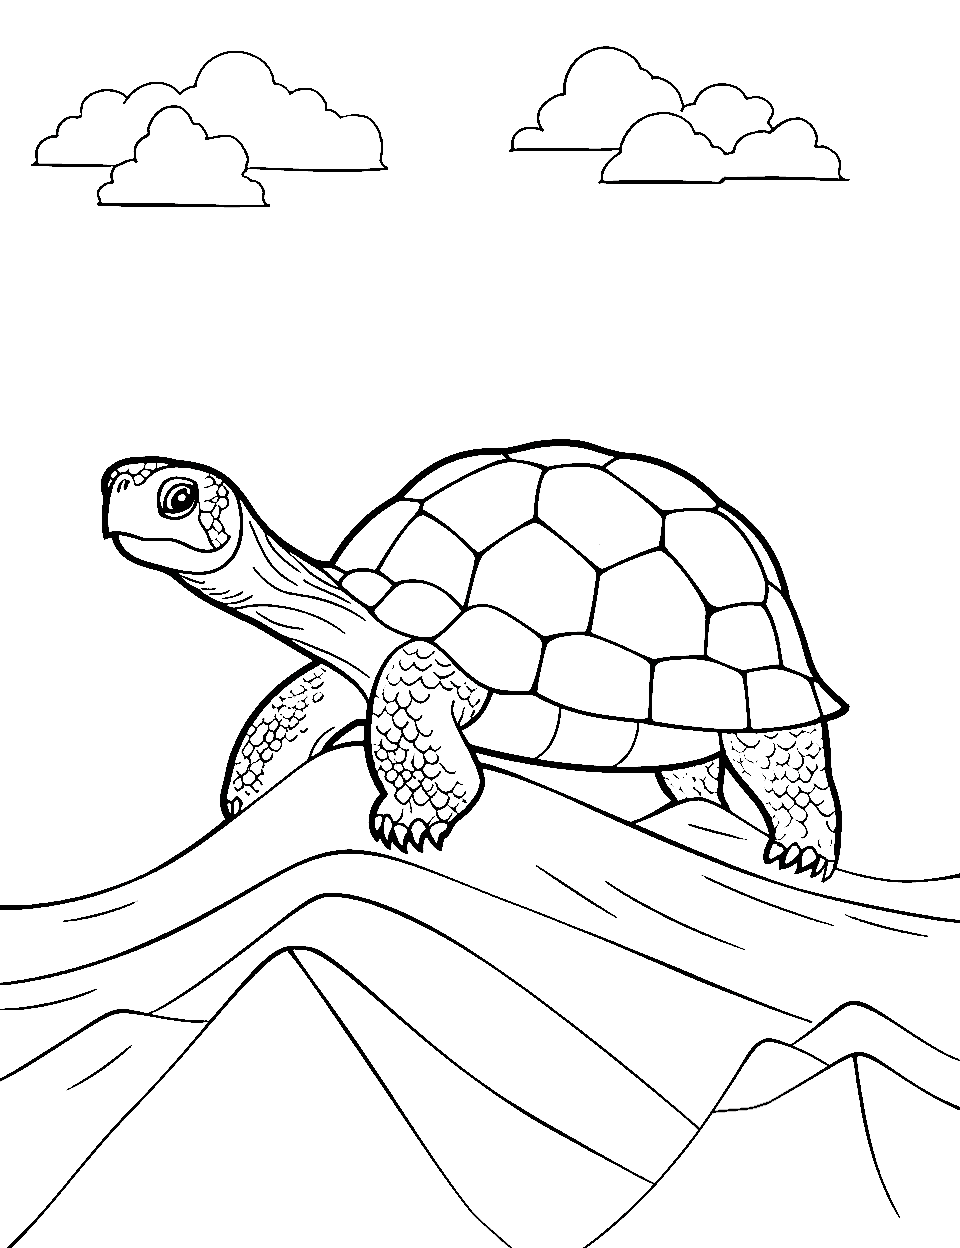 Mountain Climbing Turtle Coloring Page - A brave turtle attempting to climb a small hill or mountain.